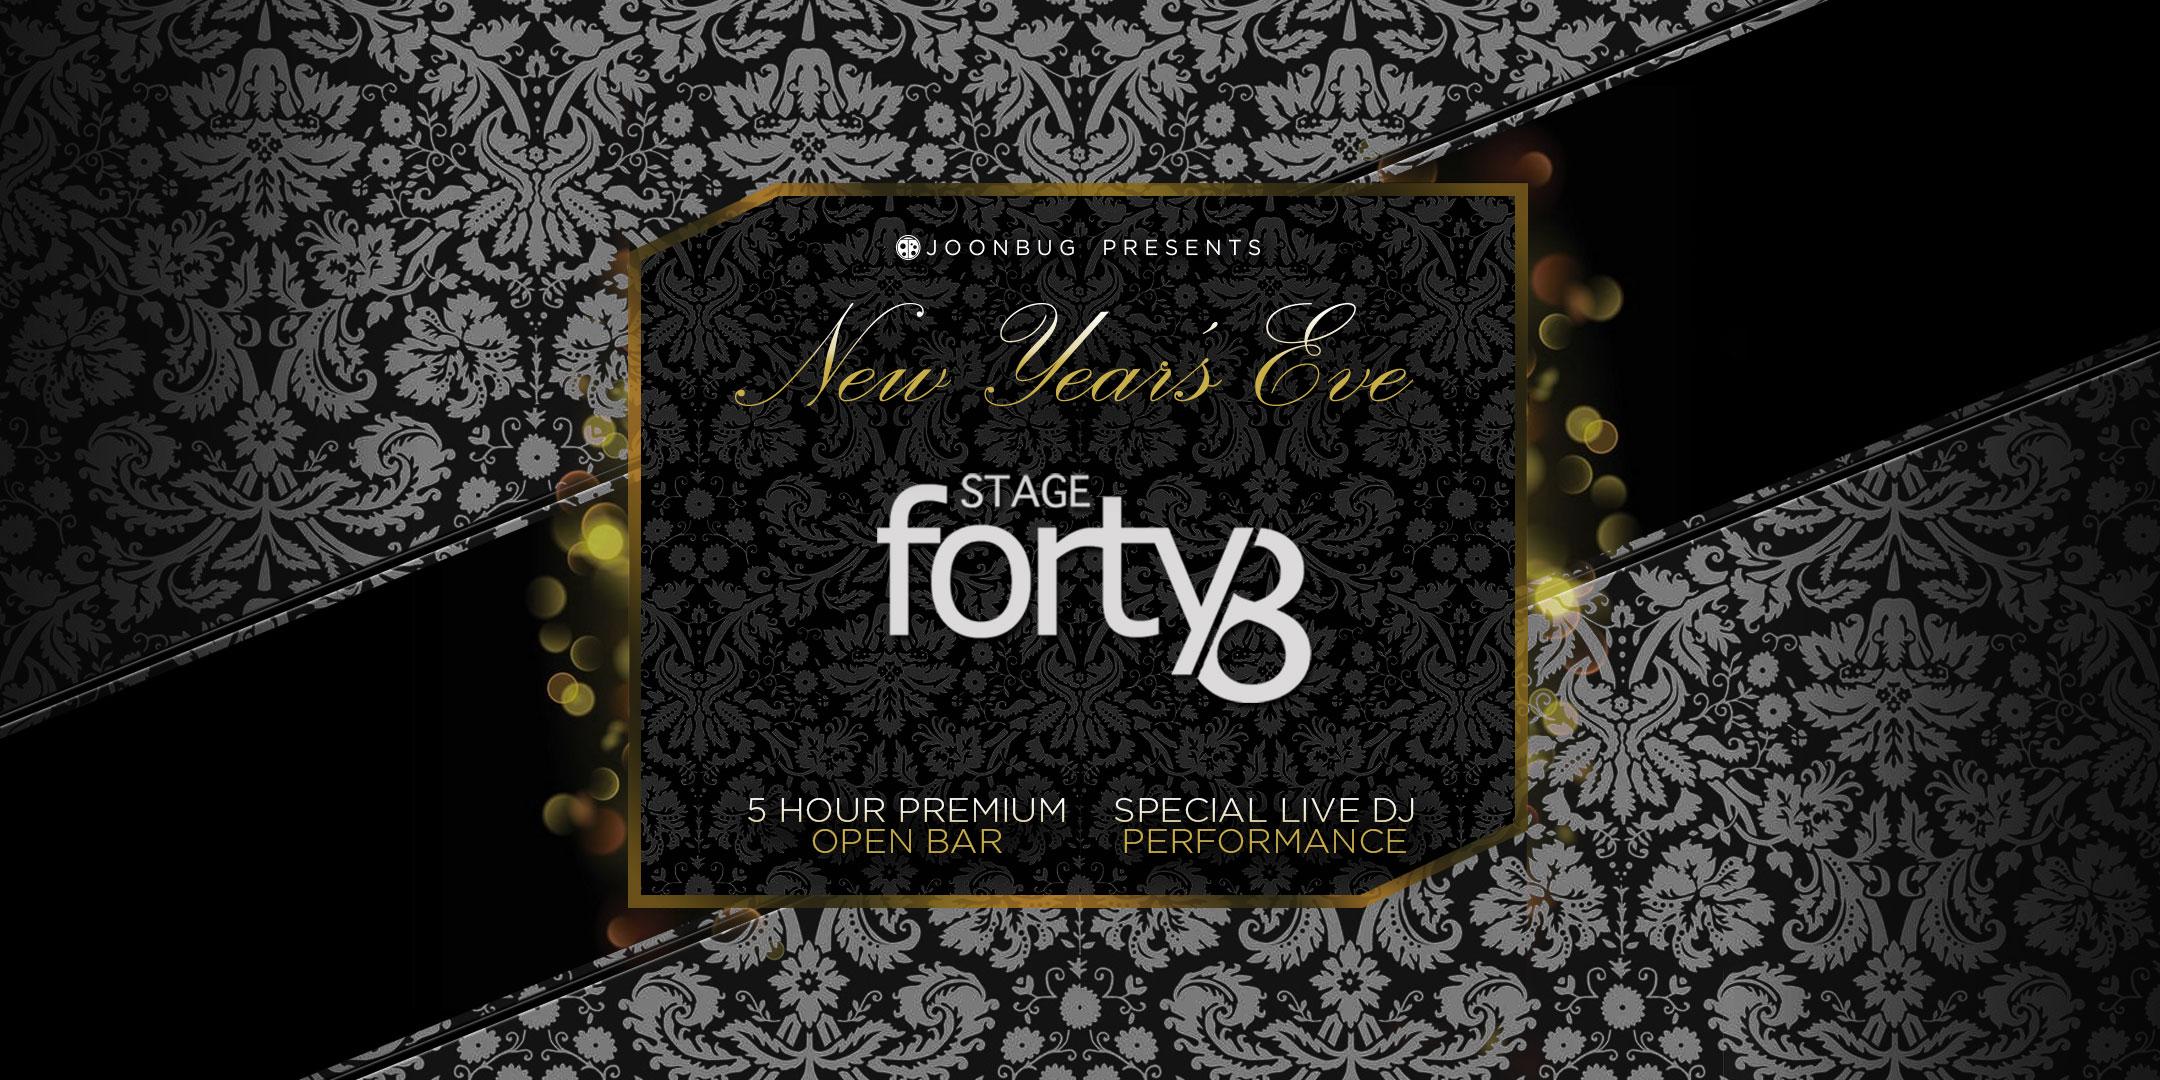 Joonbug.com Presents Stage 48 New Years Eve Party 2018